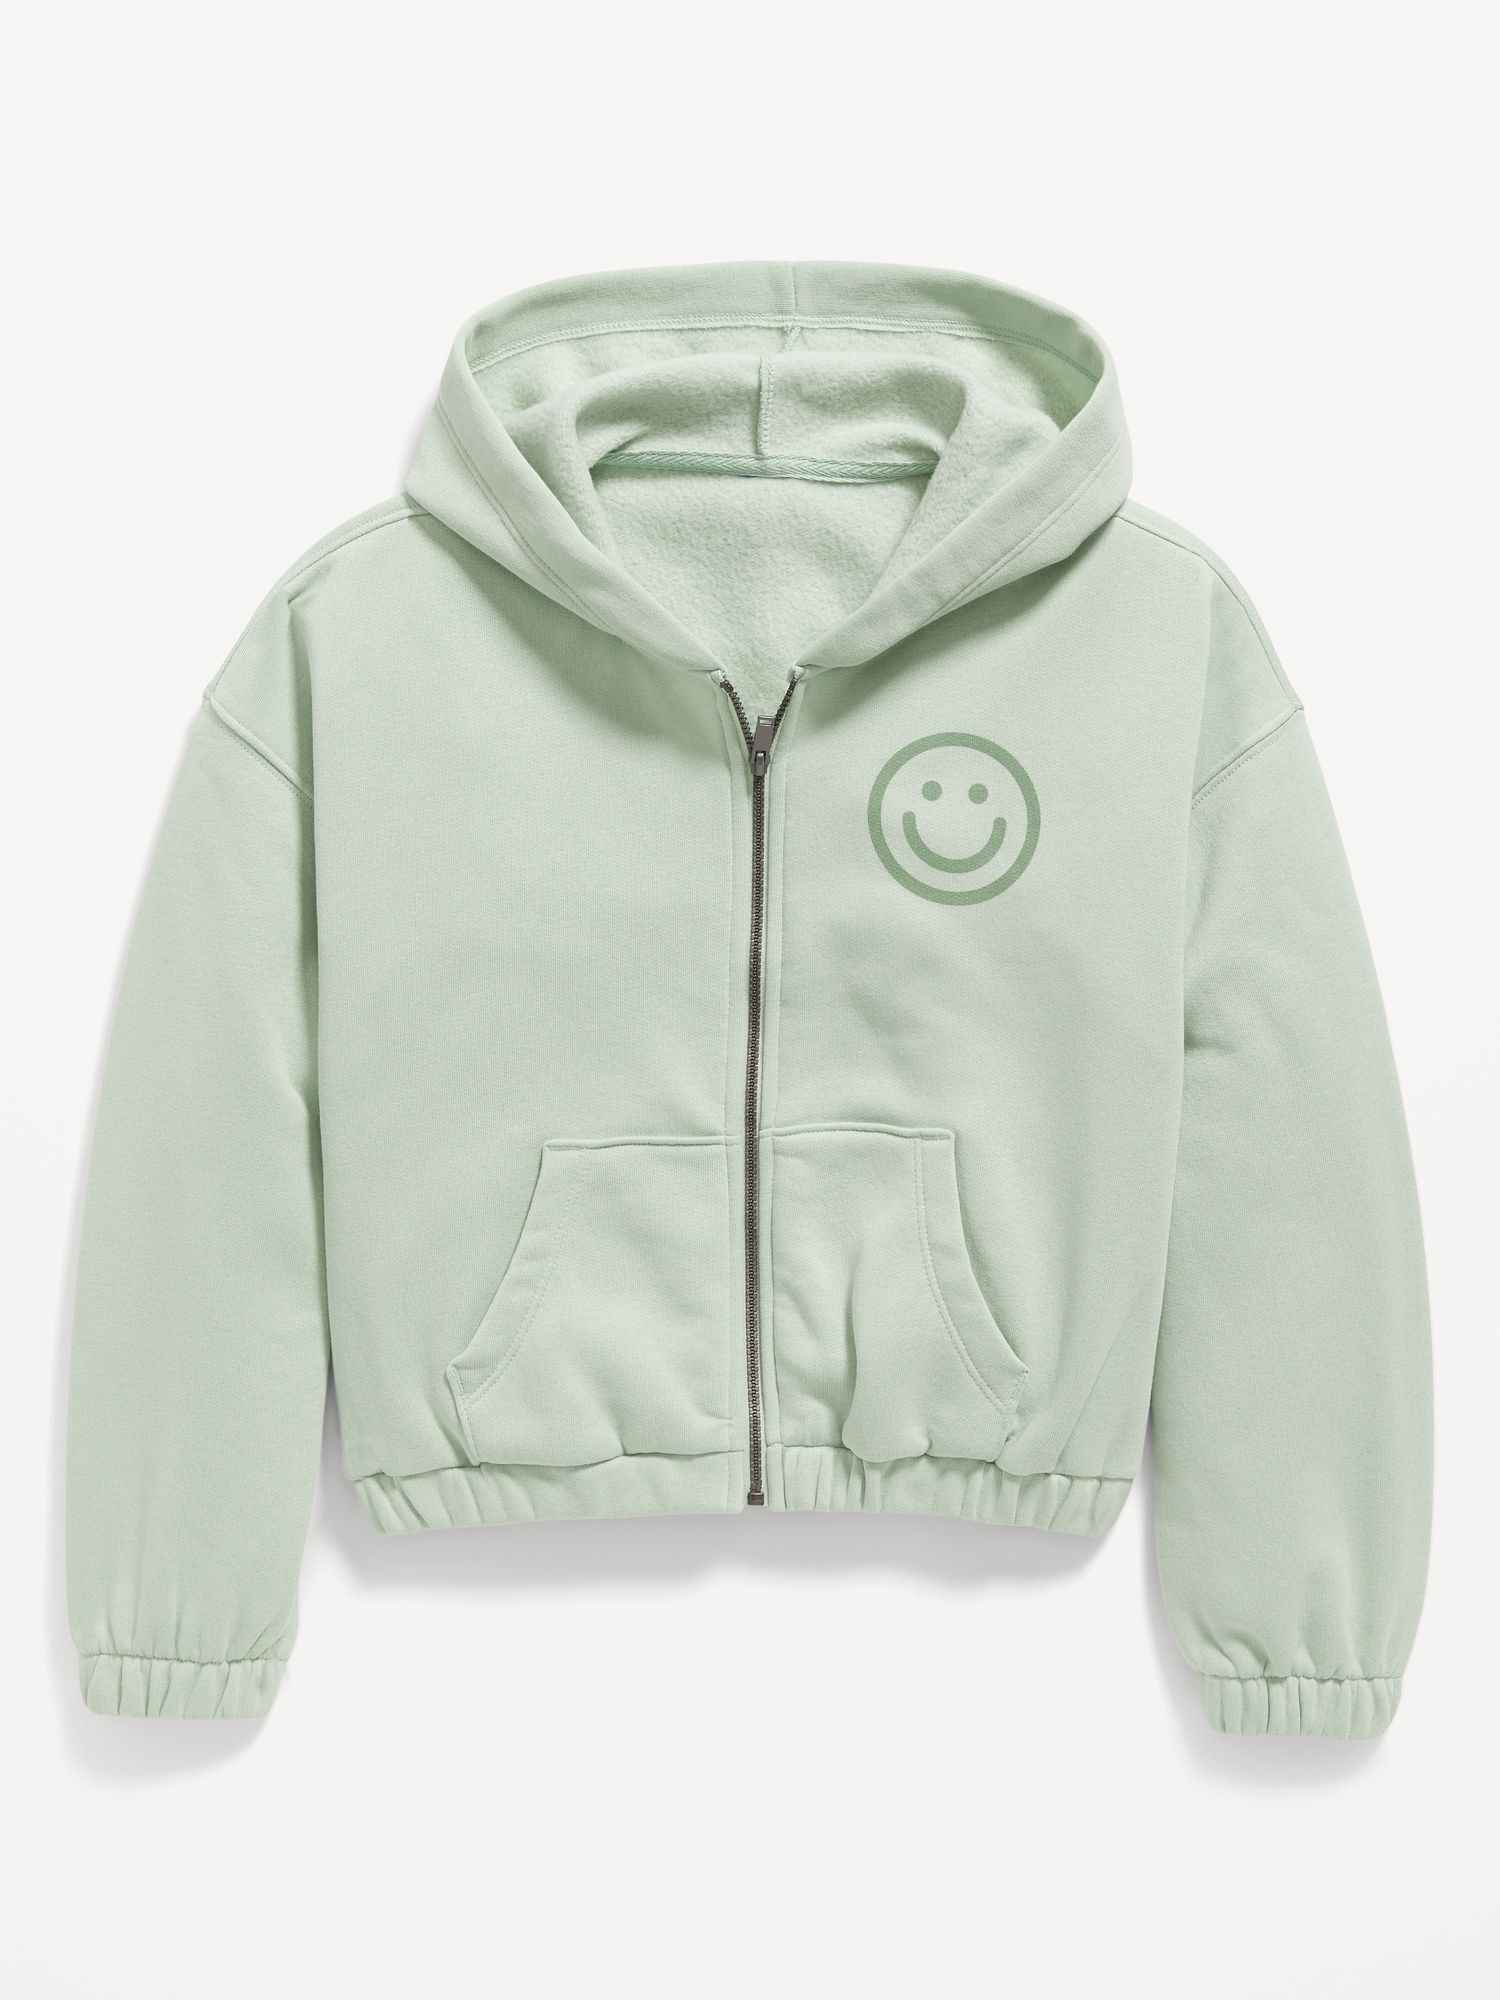 Hey, I'm from Germany and looking for the Carla Hoodie in the colors navy,  grey and mint green (size: small/medium). If you have any of the hoodies or  maybe the Brandy near